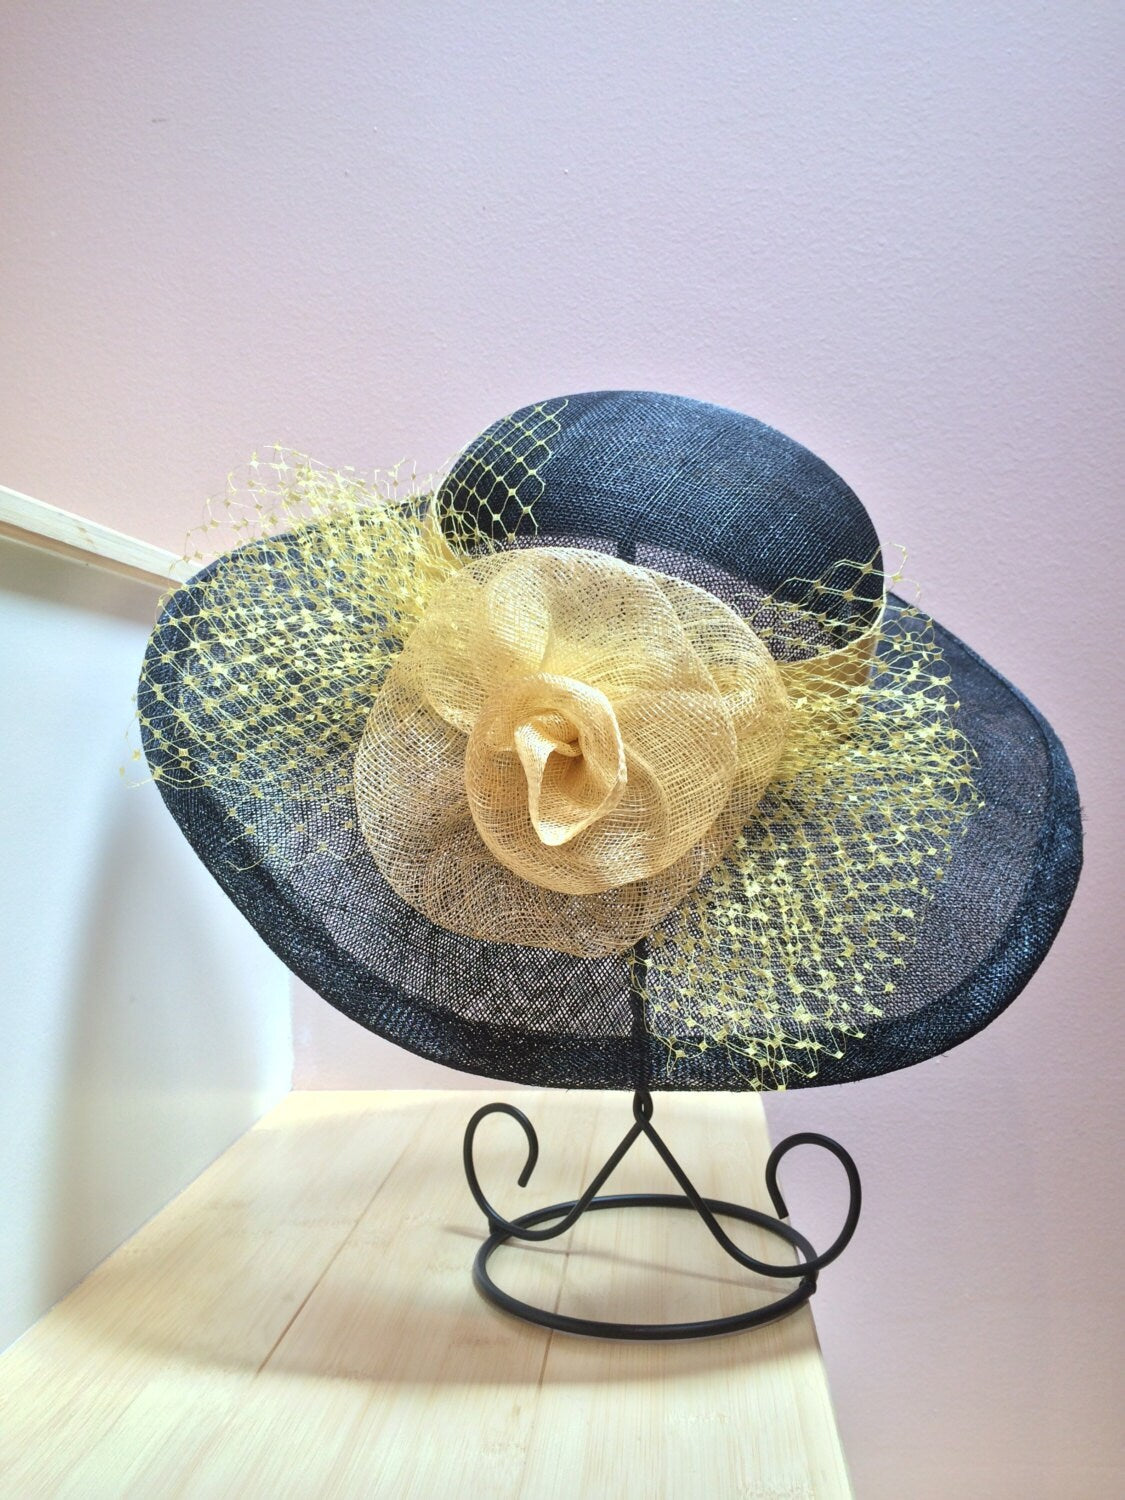 Black Sinamay Hat, Wide Brimmed hat Yellow Trim, Veiling, Black and Yellow hat. Wedding hat, Kentucky Derby, Royal Ascot, Race Track Hat